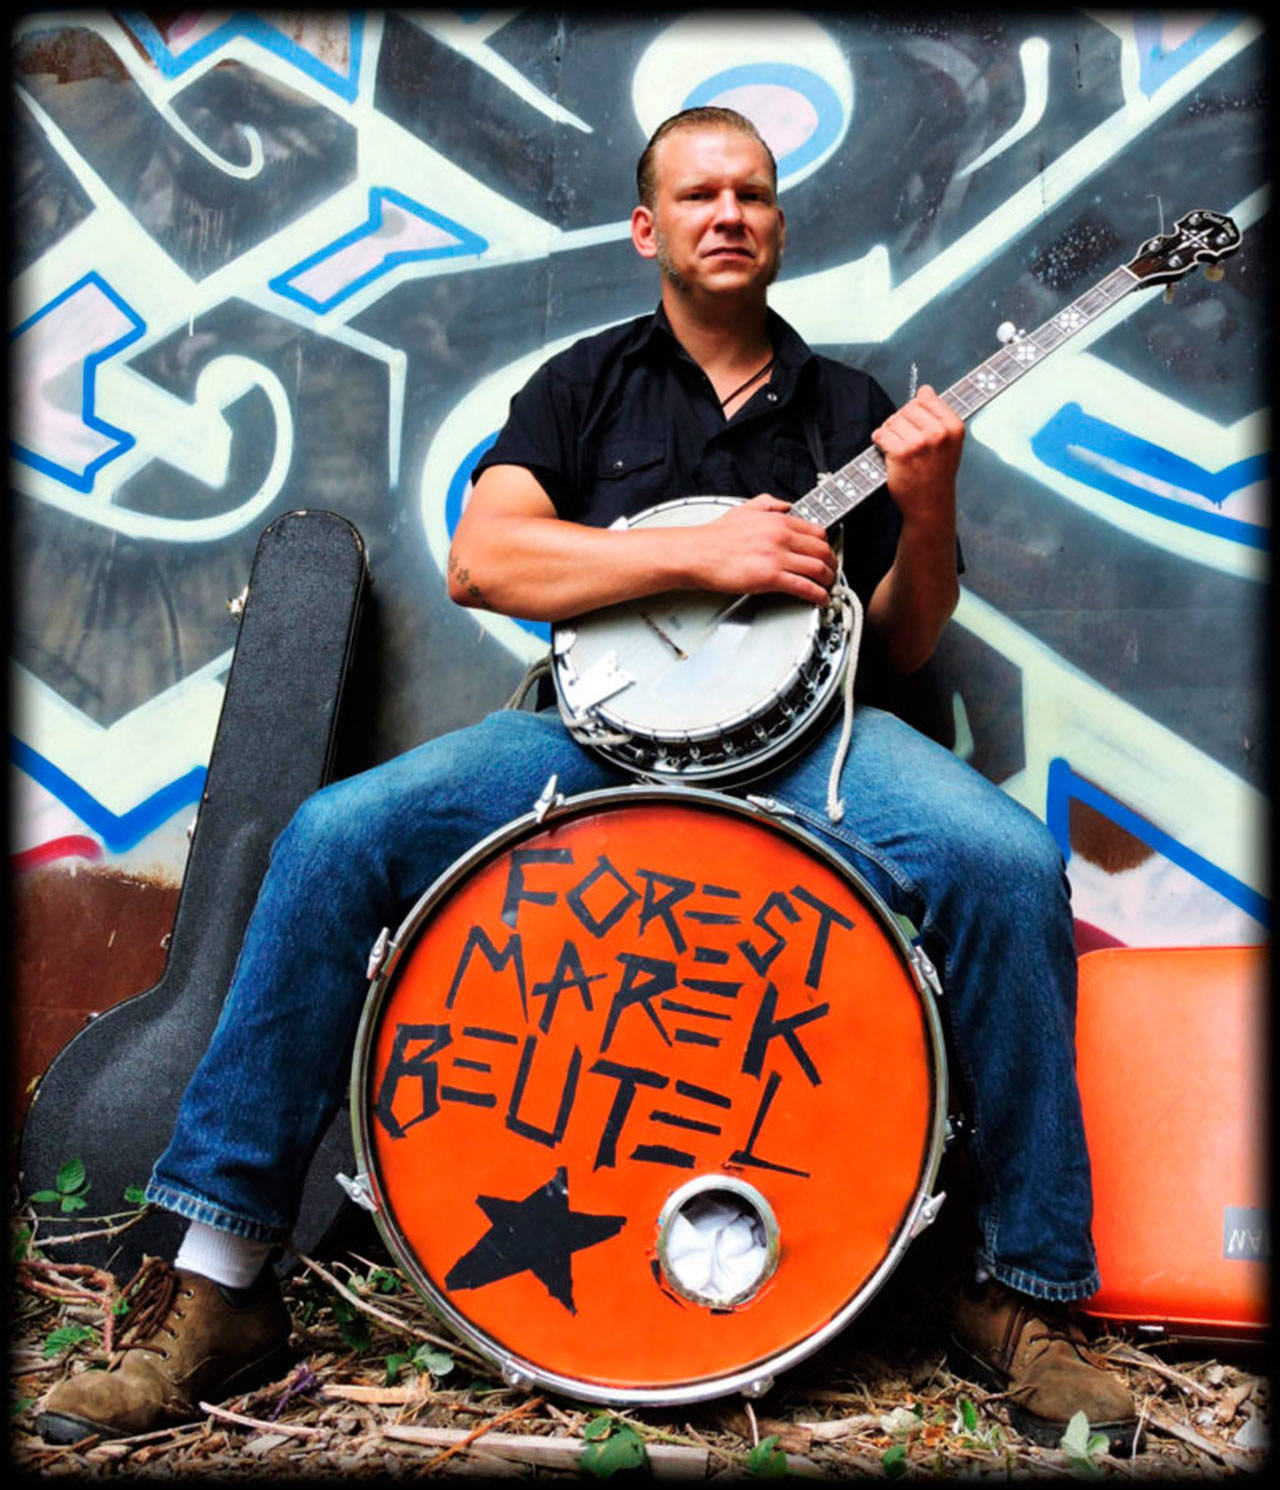 Photo courtesy of the Treehouse Café | Forest Beutel, one man band extraordinaire, will rock the Treehouse Café at 8 p.m. Friday, Dec. 22 in a special free concert.